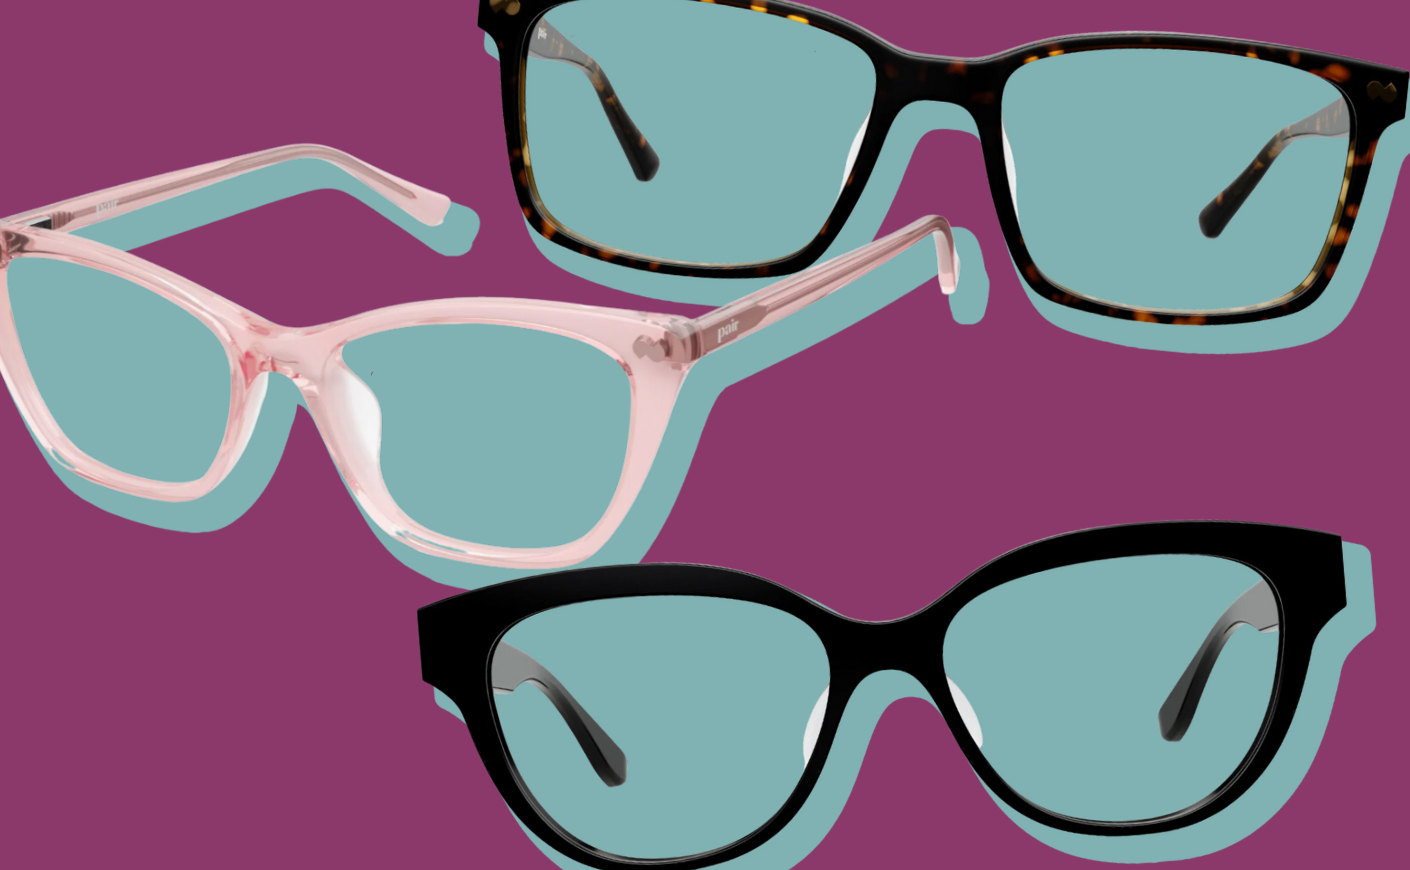 glasses frames on a purple and teal background